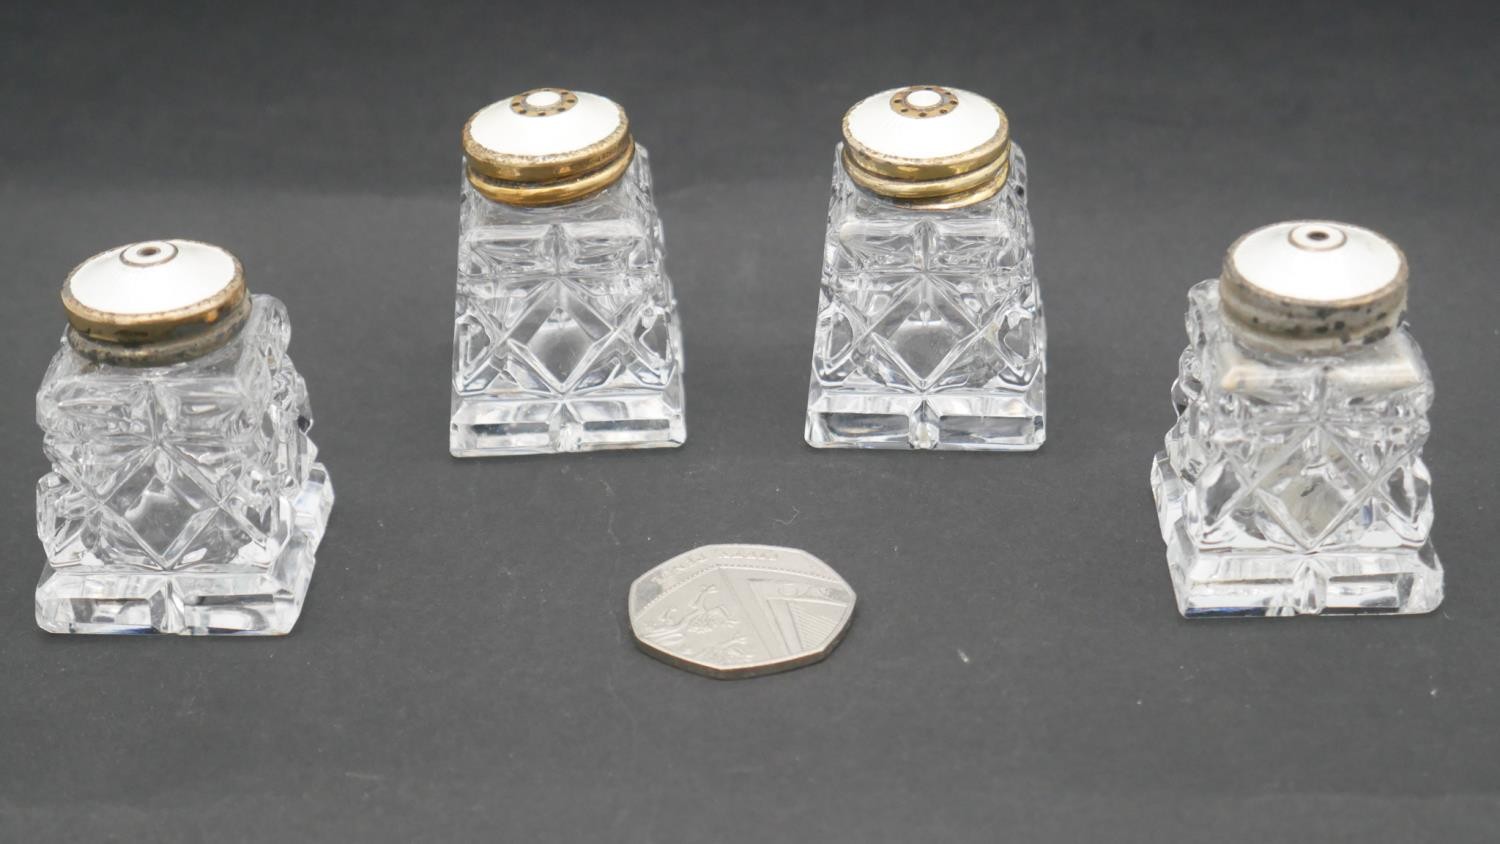 Hroar Prydz - Four silver gilt Norwegian cut crystal salt and pepper shakers with cream guilloche - Image 2 of 3